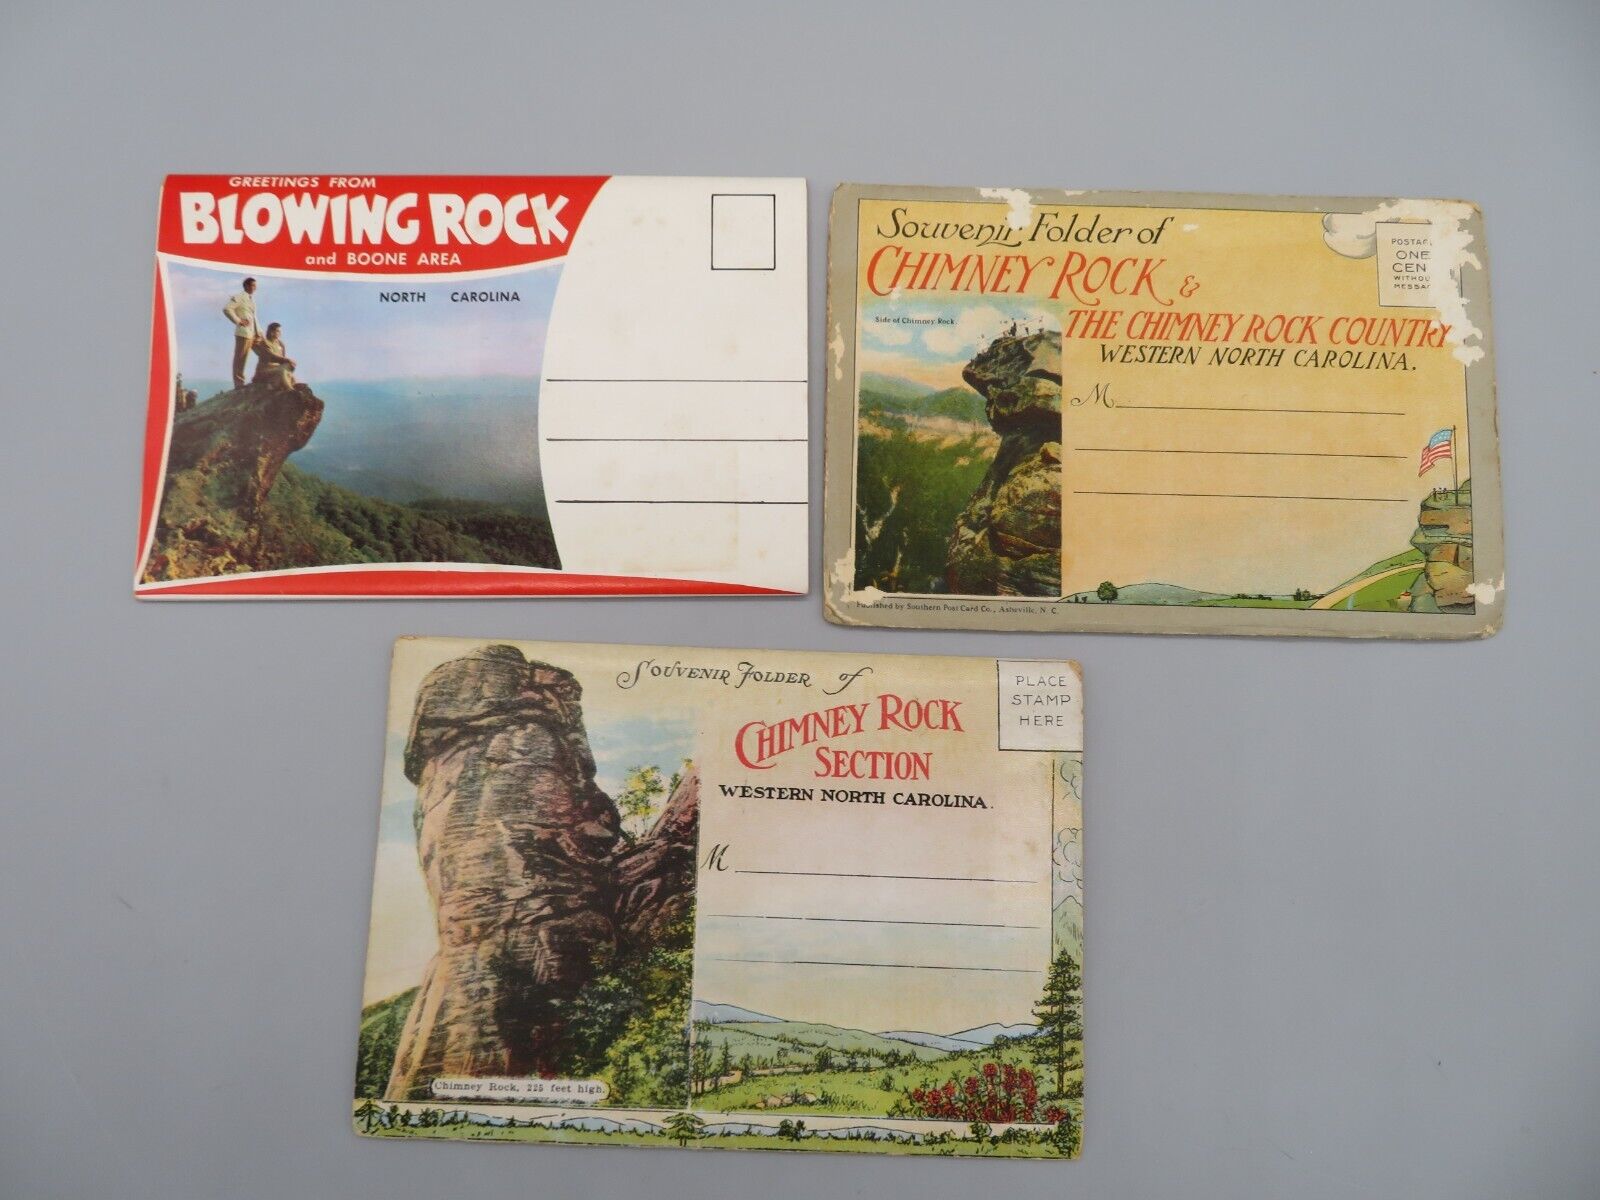 3 Fold Outs/Postcards 2 Chimney Rock & 1 Blowing Rock